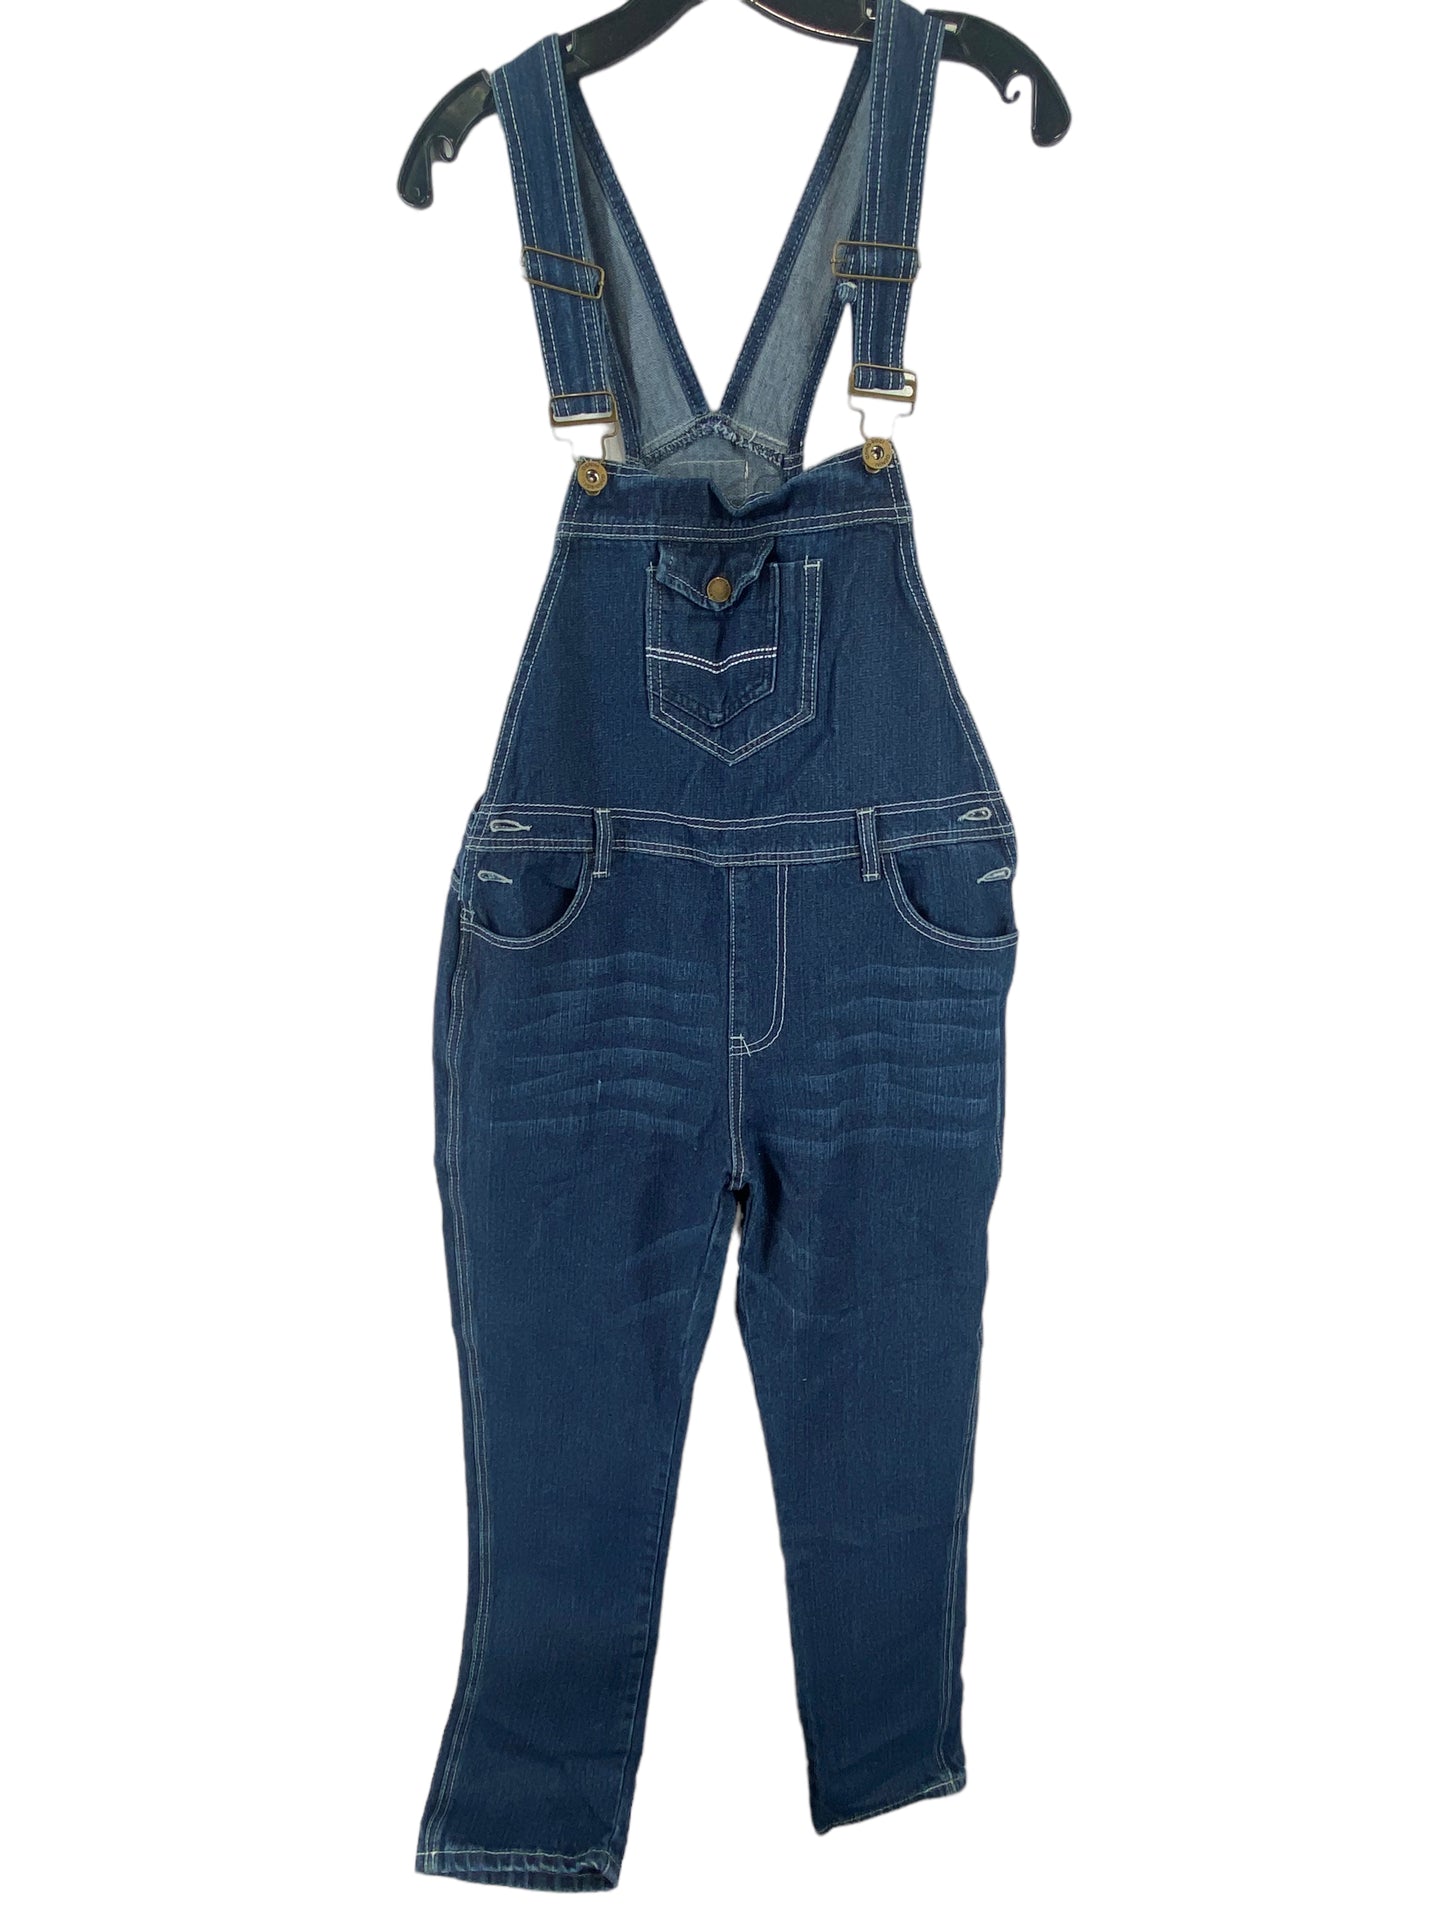 Overalls By Clothes Mentor  Size: Xl